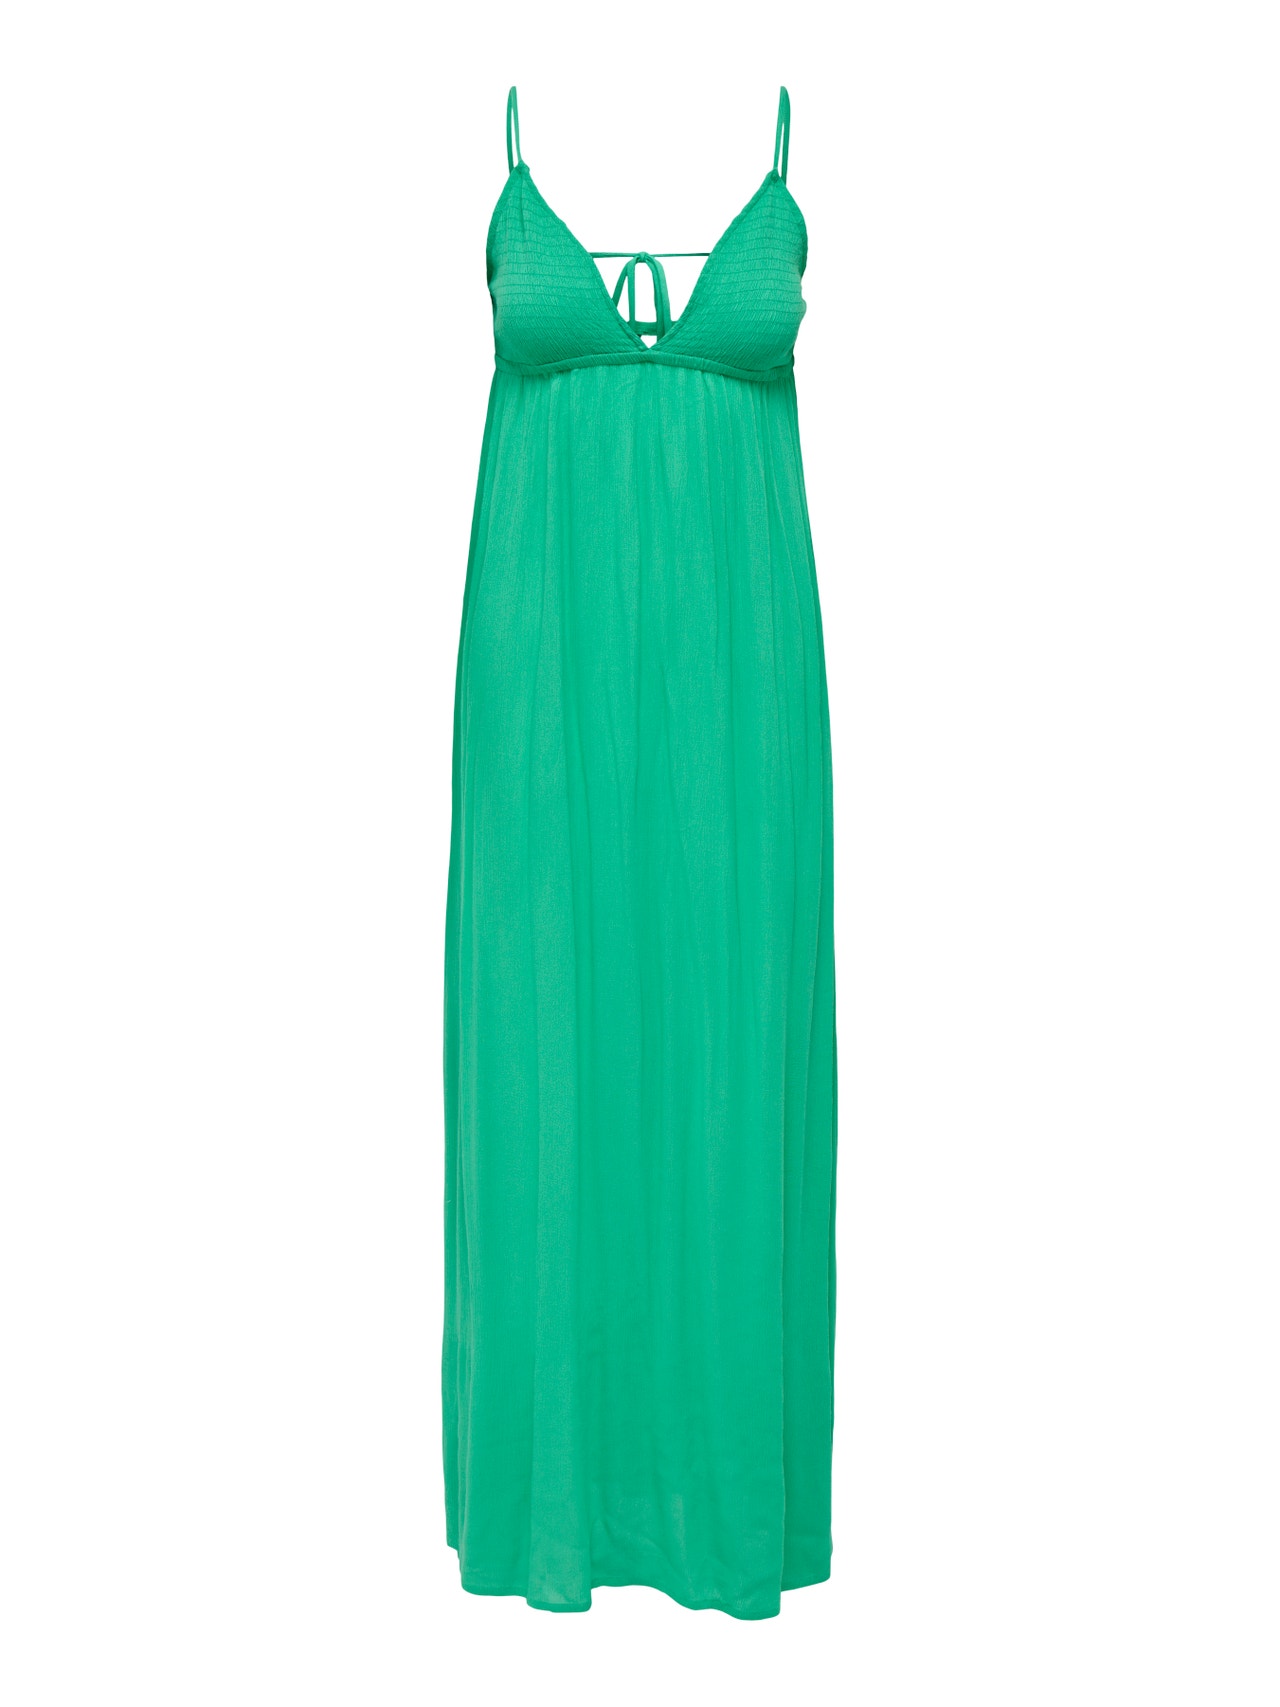 ONLY Maxi v-neck dress -Simply Green - 15292076